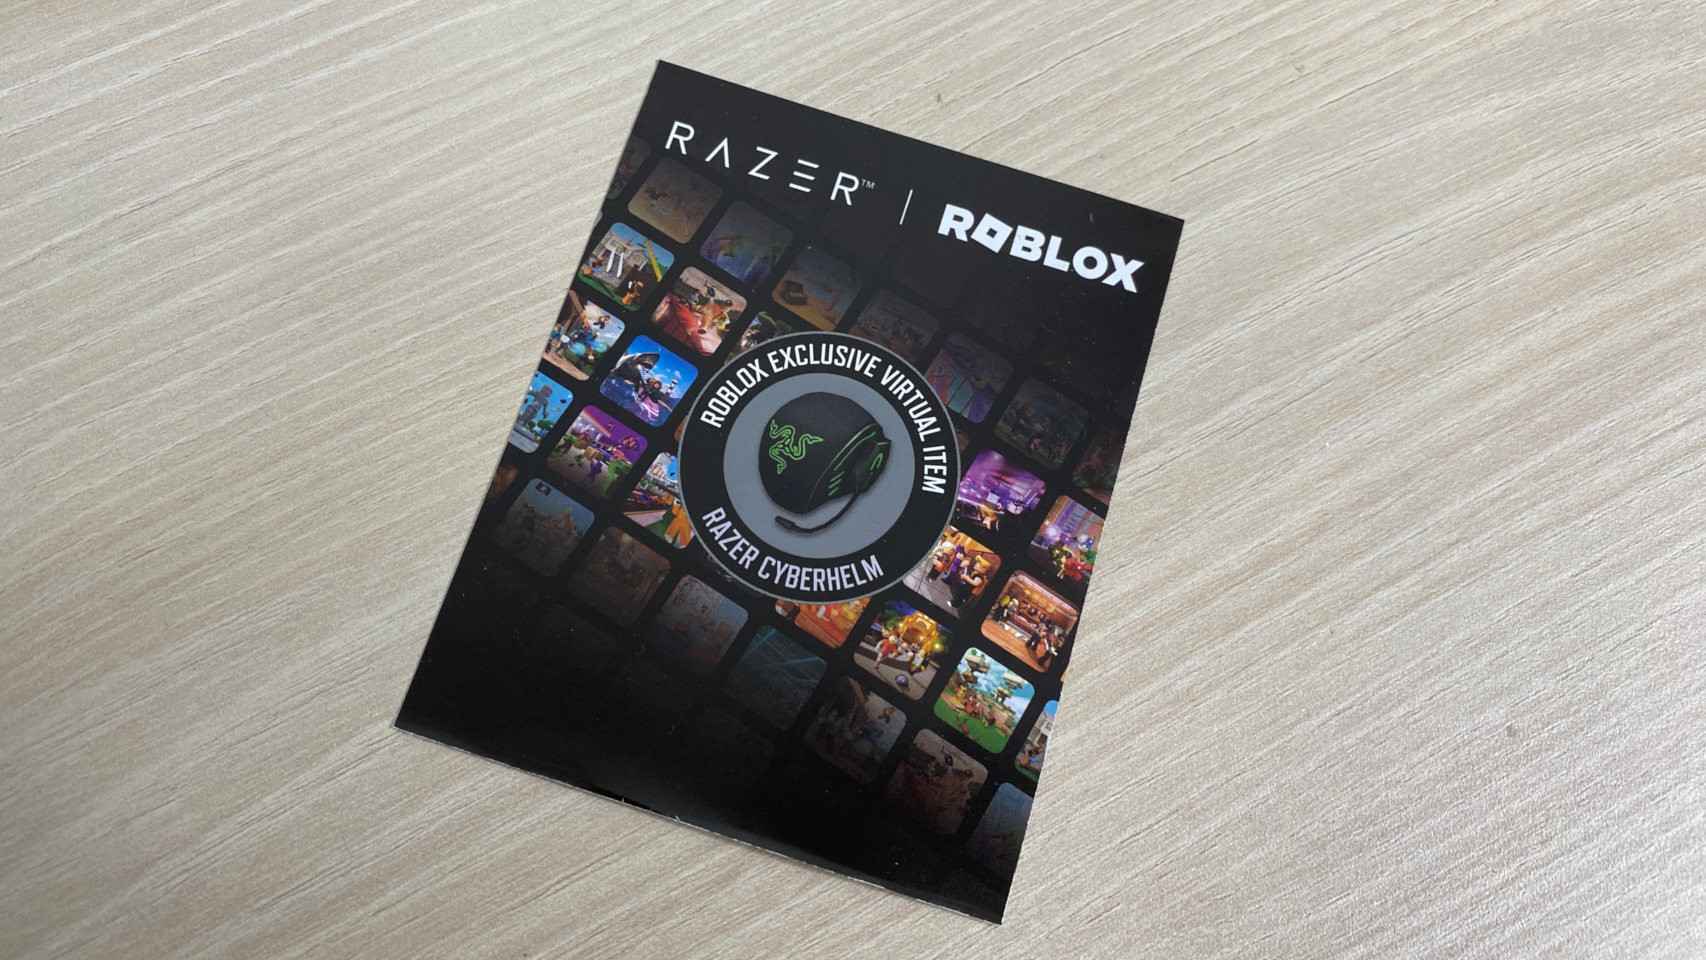 Razer Roblox Edition devices come with codes for Roblox